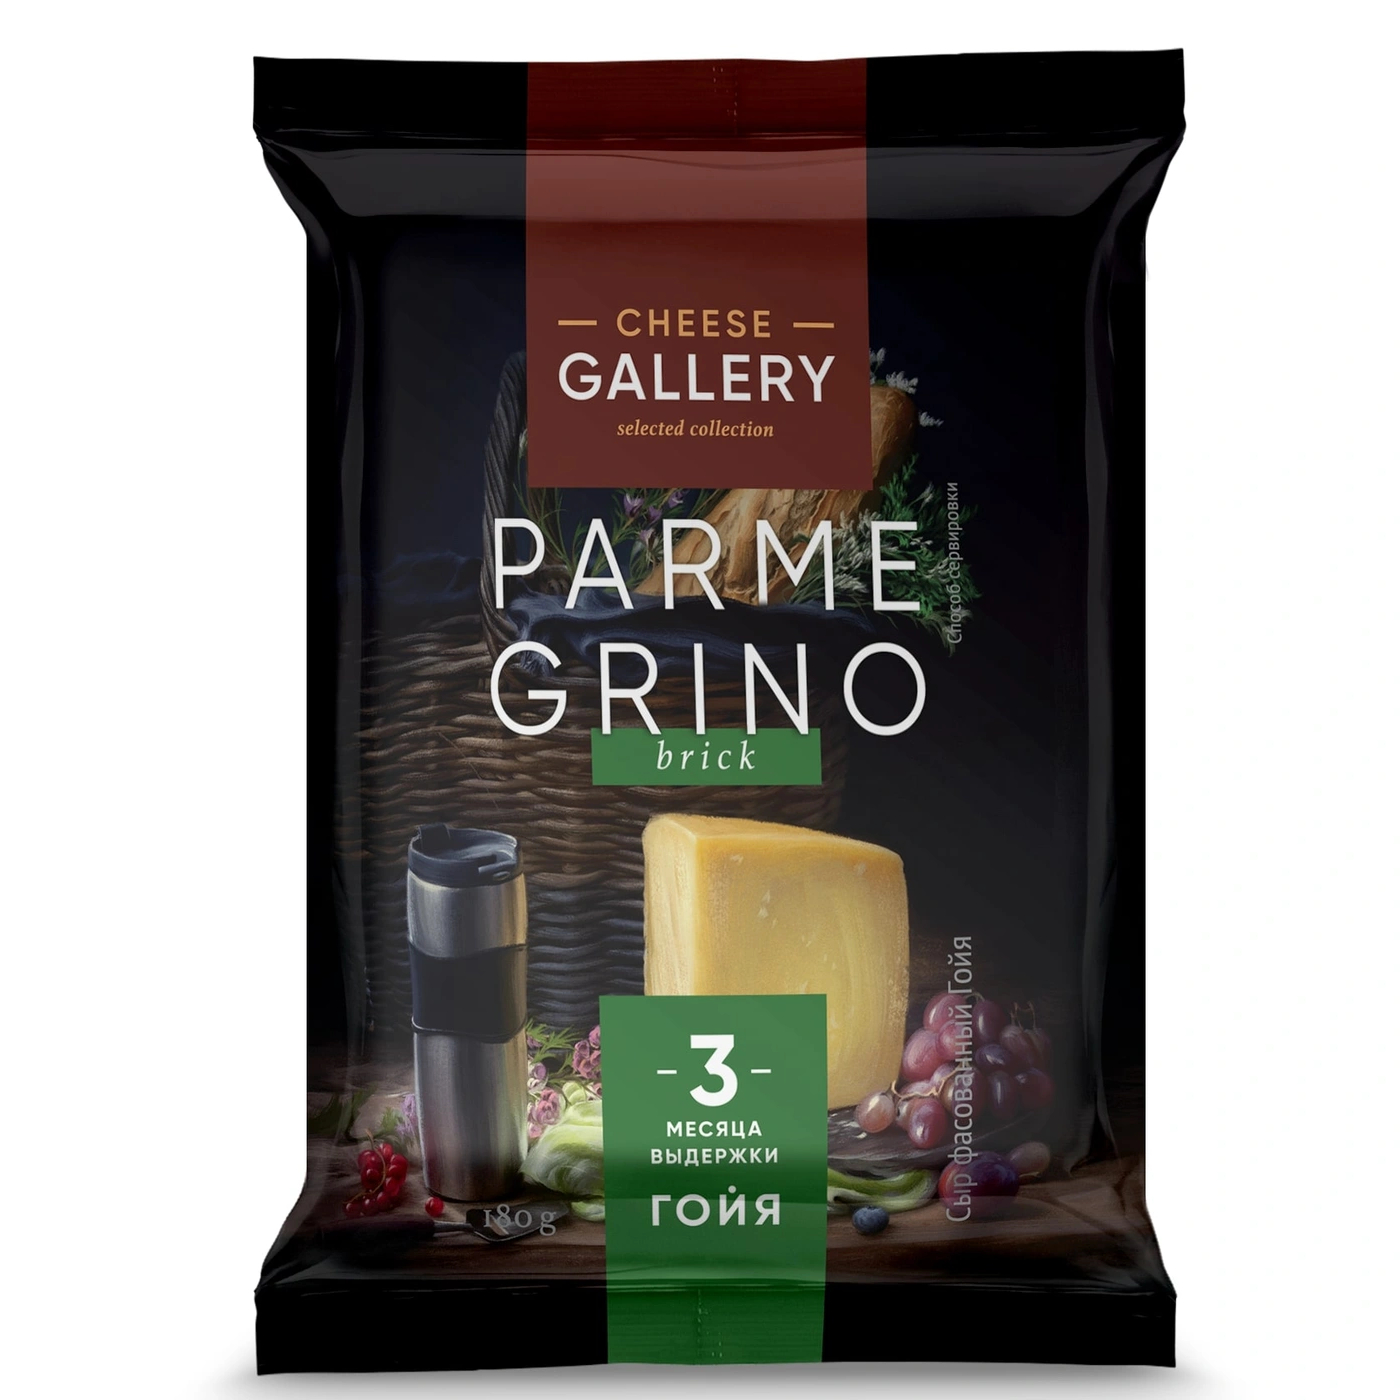 Cheese Gallery parmegrino Гойя 40 кусок